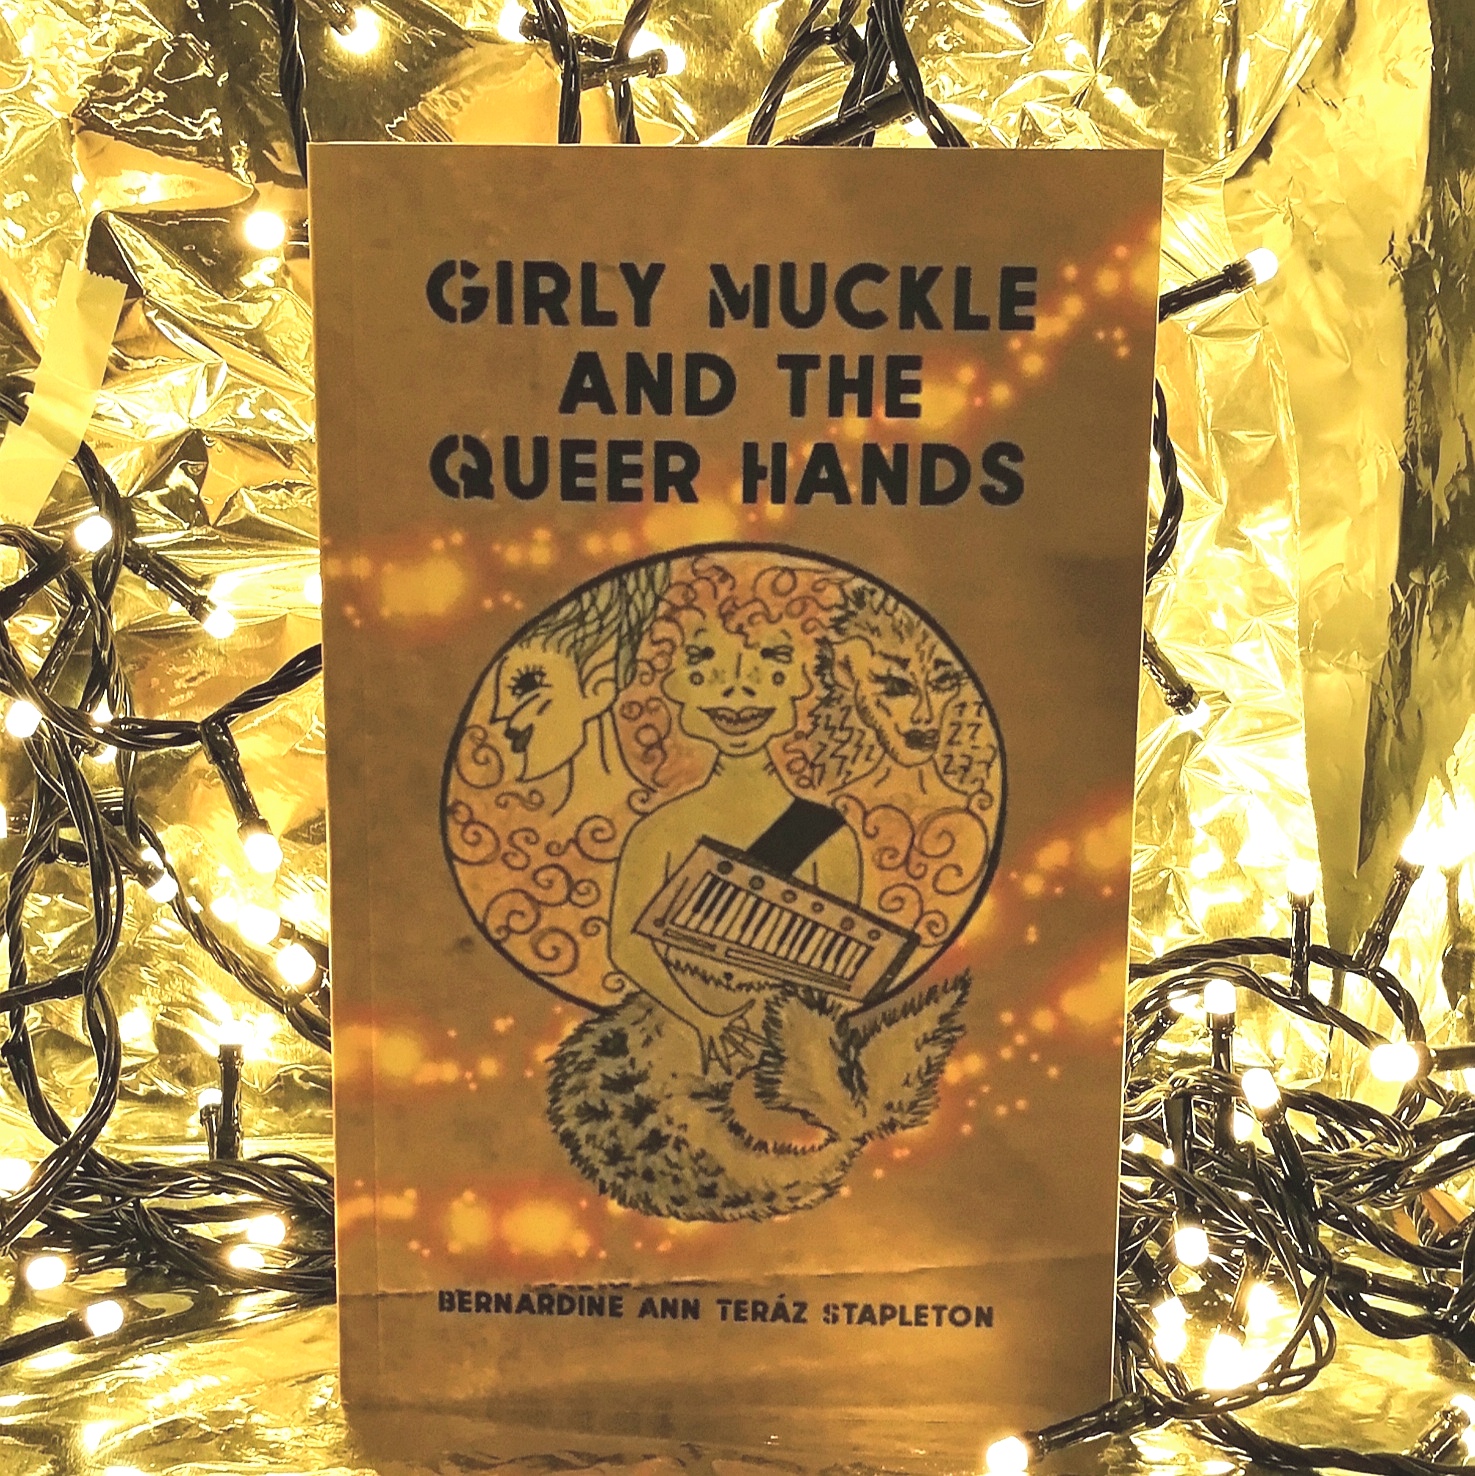 LAUNCHED: Girly Muckle and the Queer Hands by Bernardine Ann Teráz Stapleton